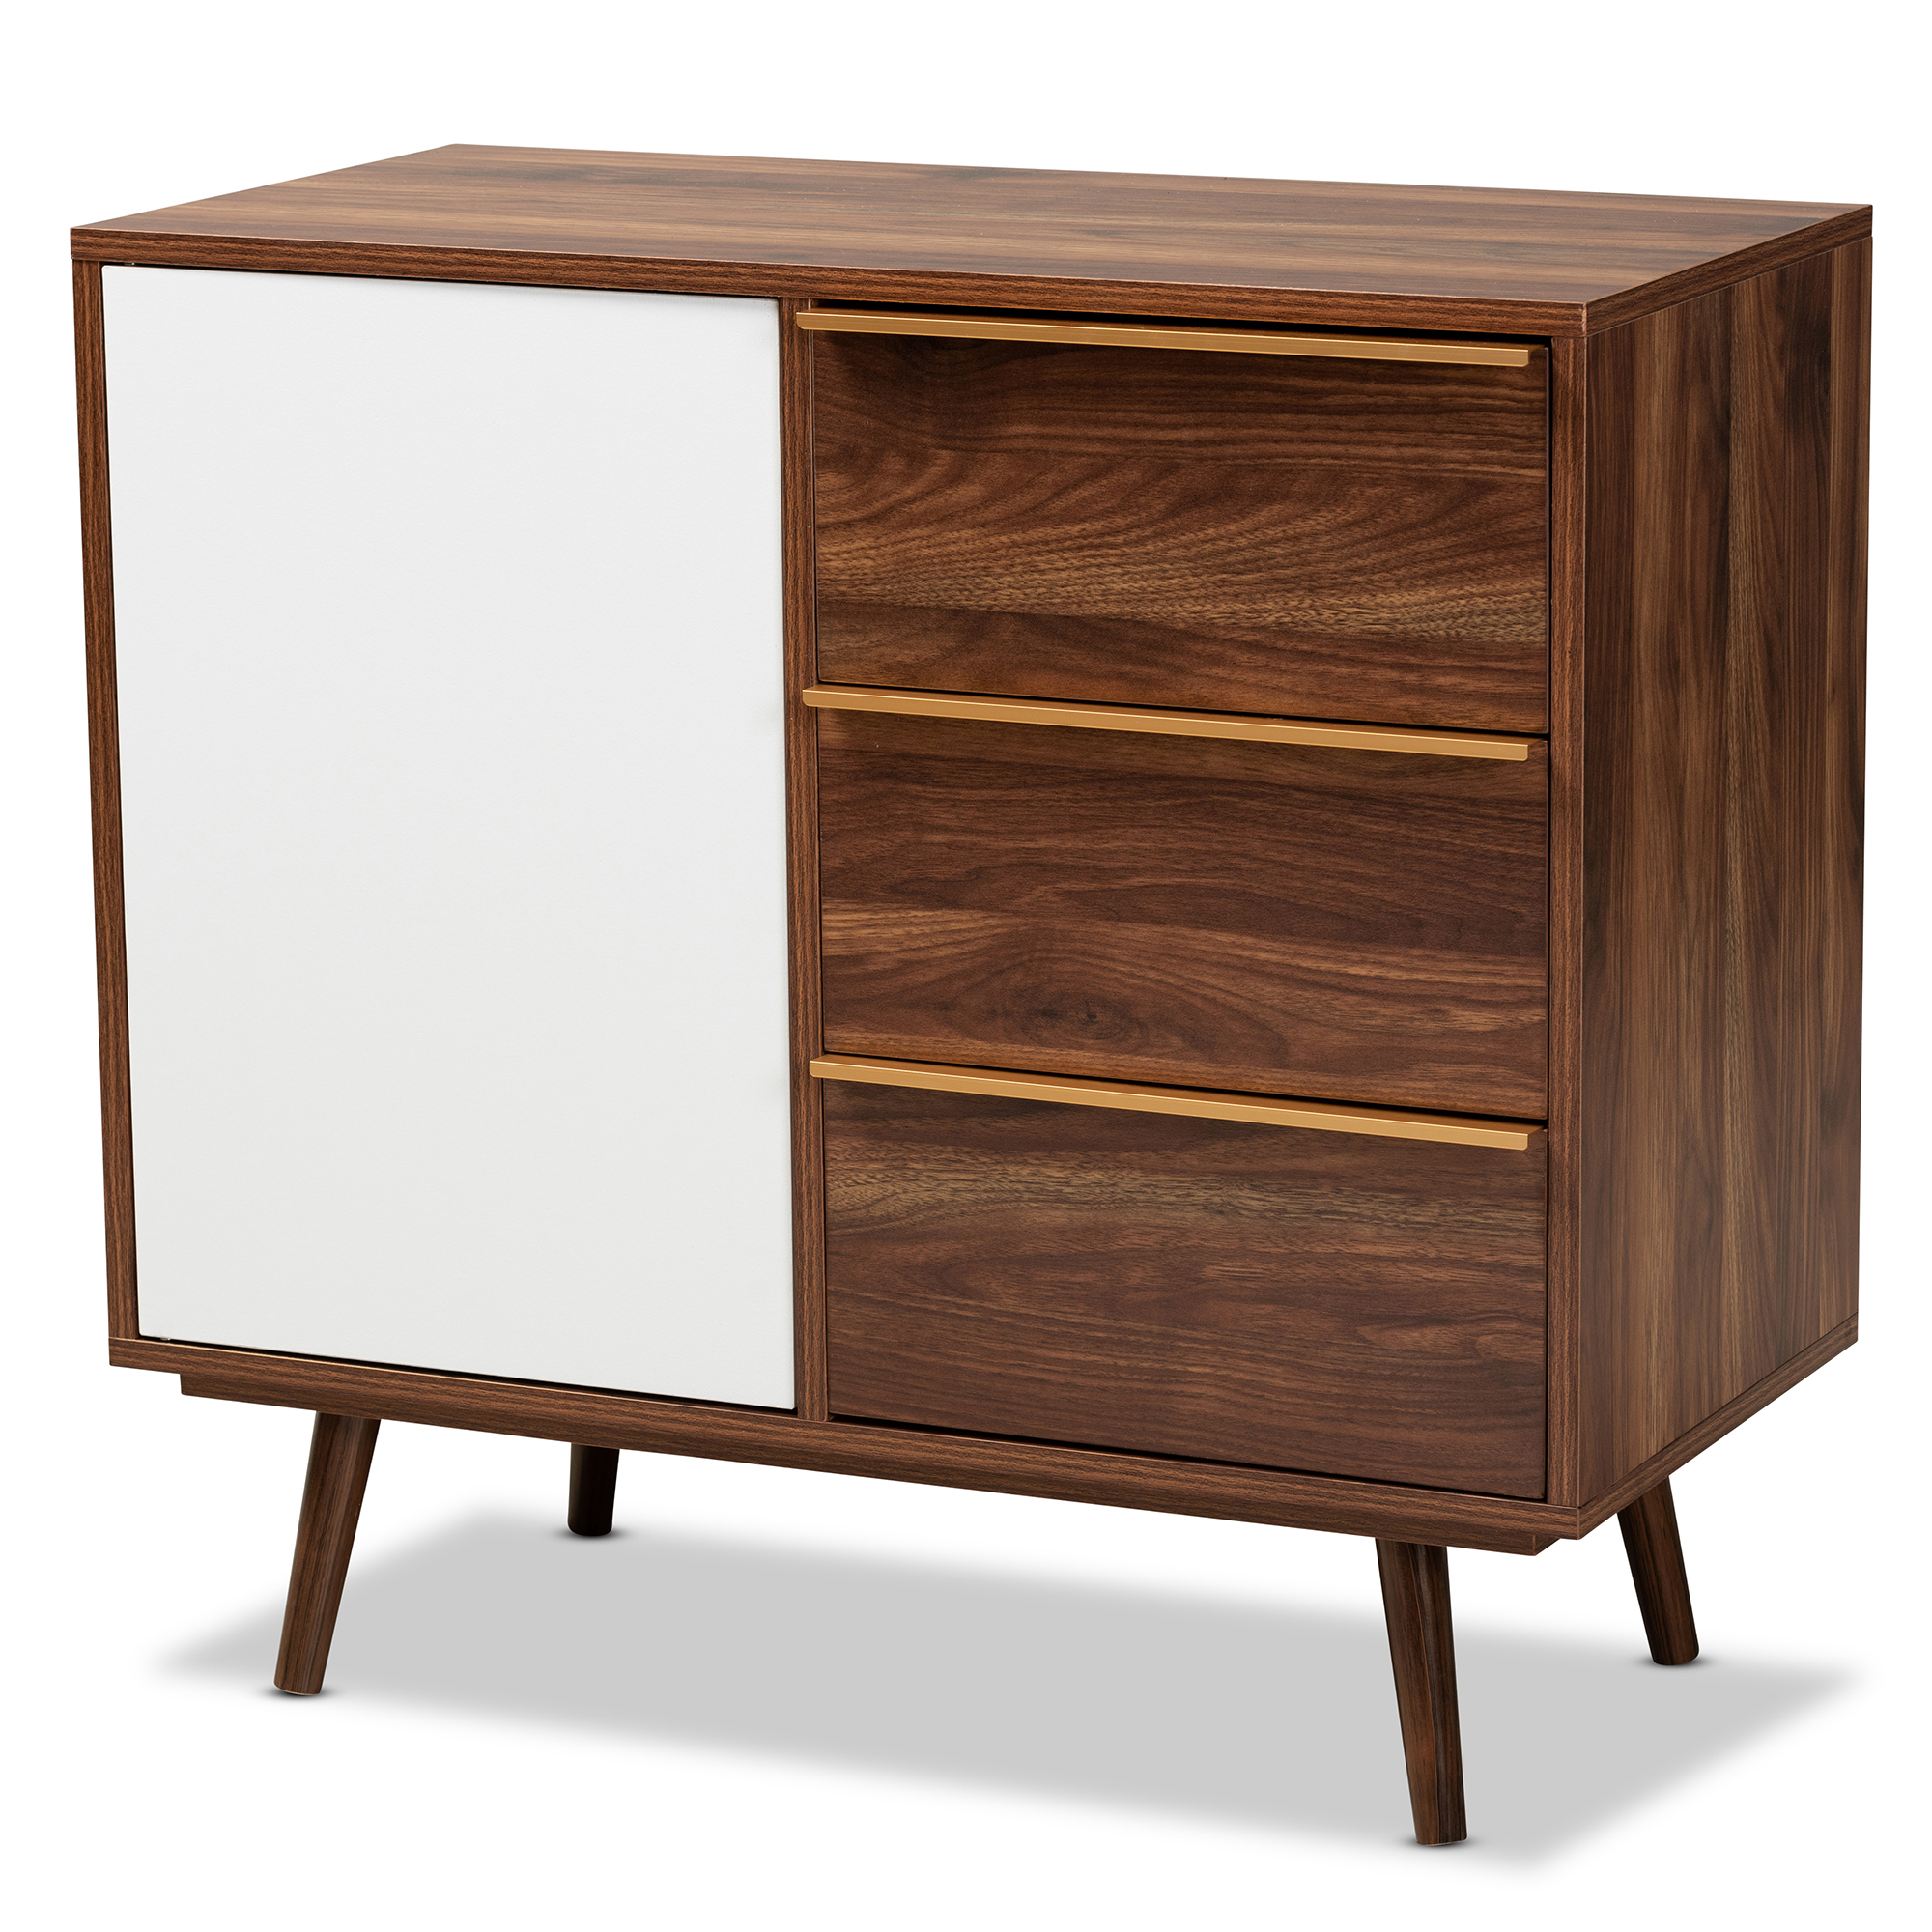 Baxton Studio Grover Mid-Century Modern Two-Tone Cherry Brown and White Finished Wood 1-Door Sideboard Buffet